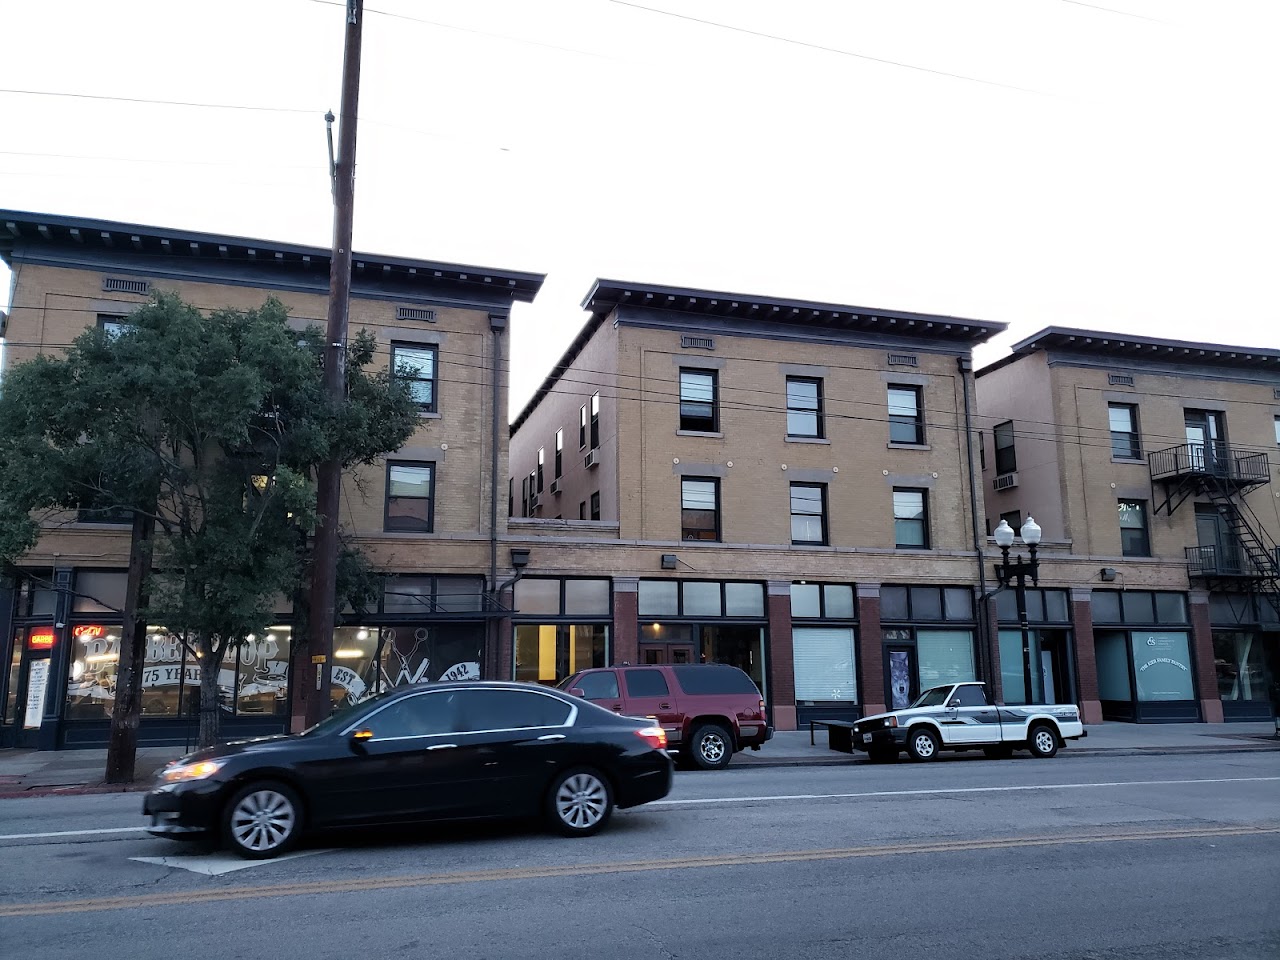 Photo of MARION HOTEL. Affordable housing located at 184 25TH ST OGDEN, UT 84401